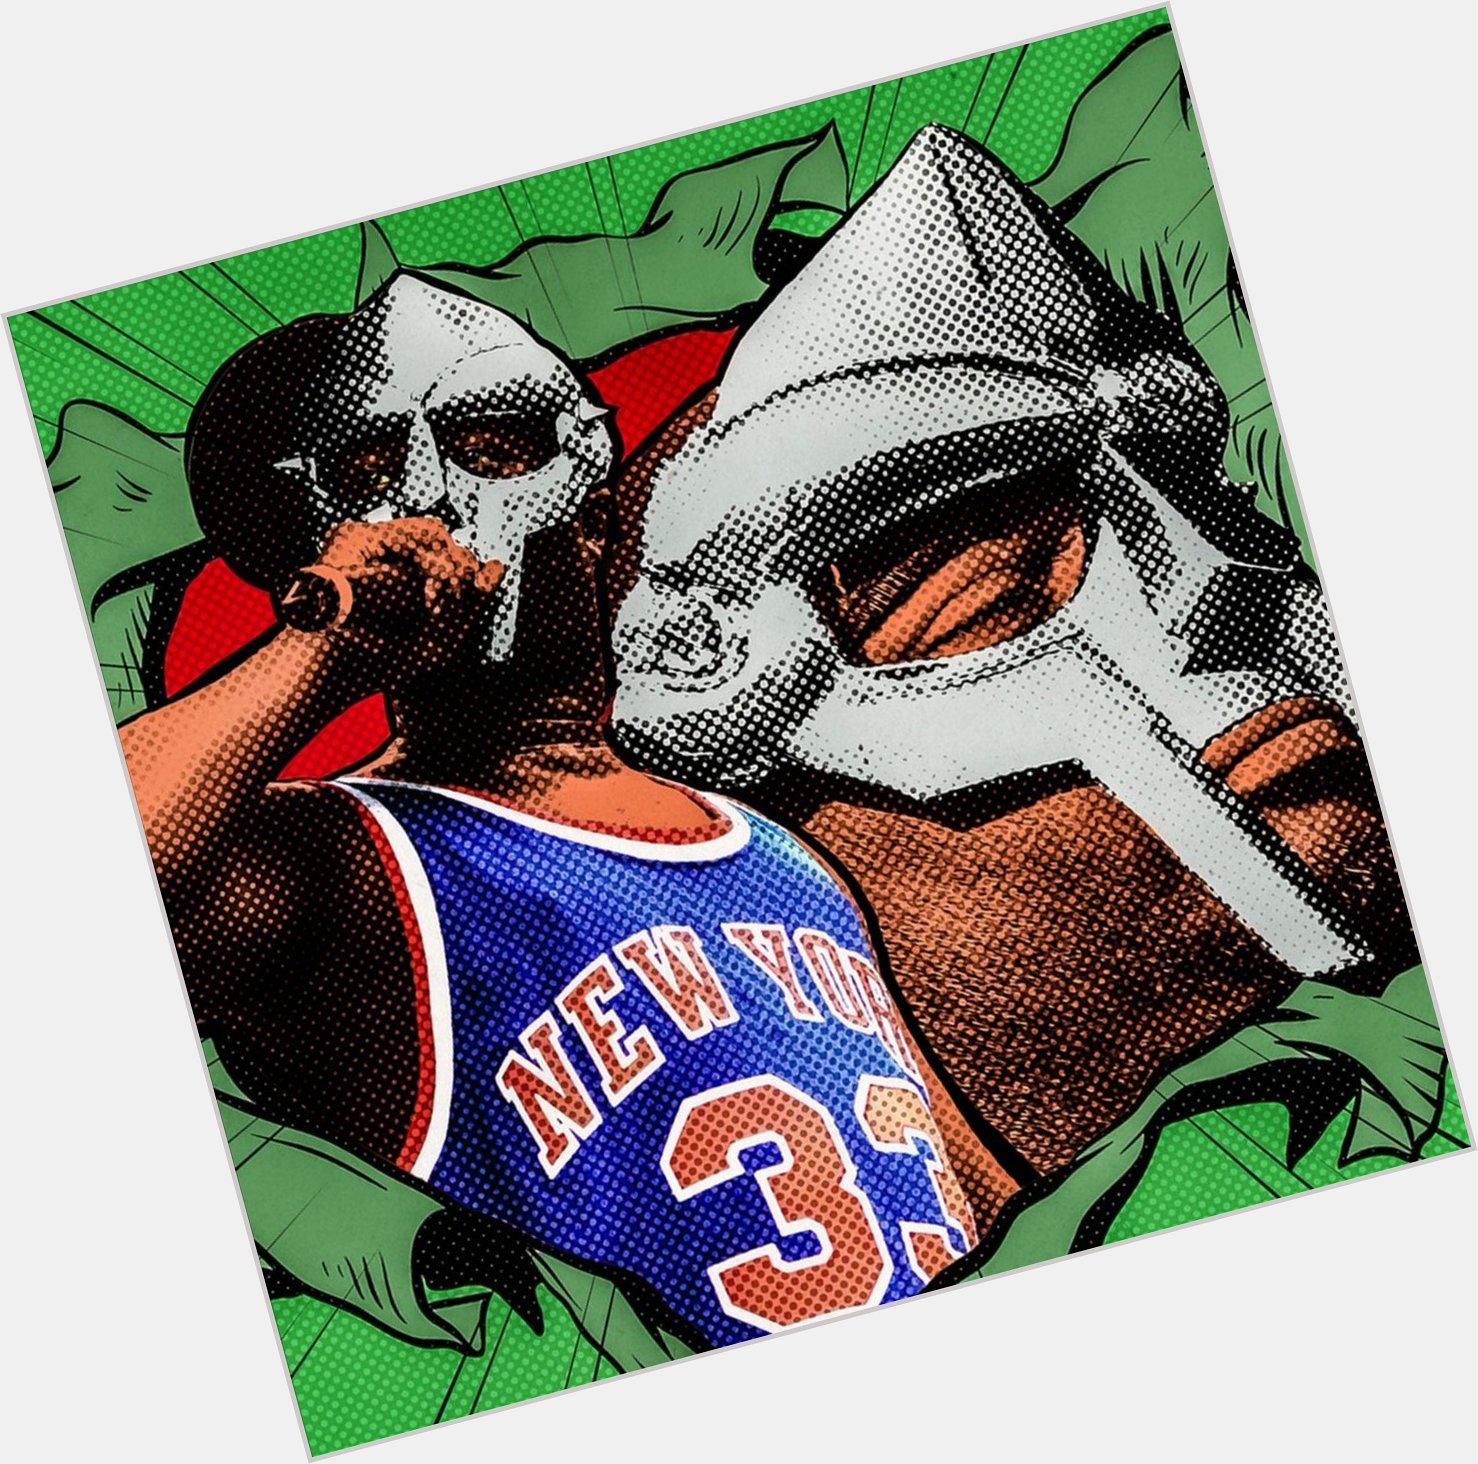 Happy Heavenly Birthday to MF DOOM! The flow continues! 